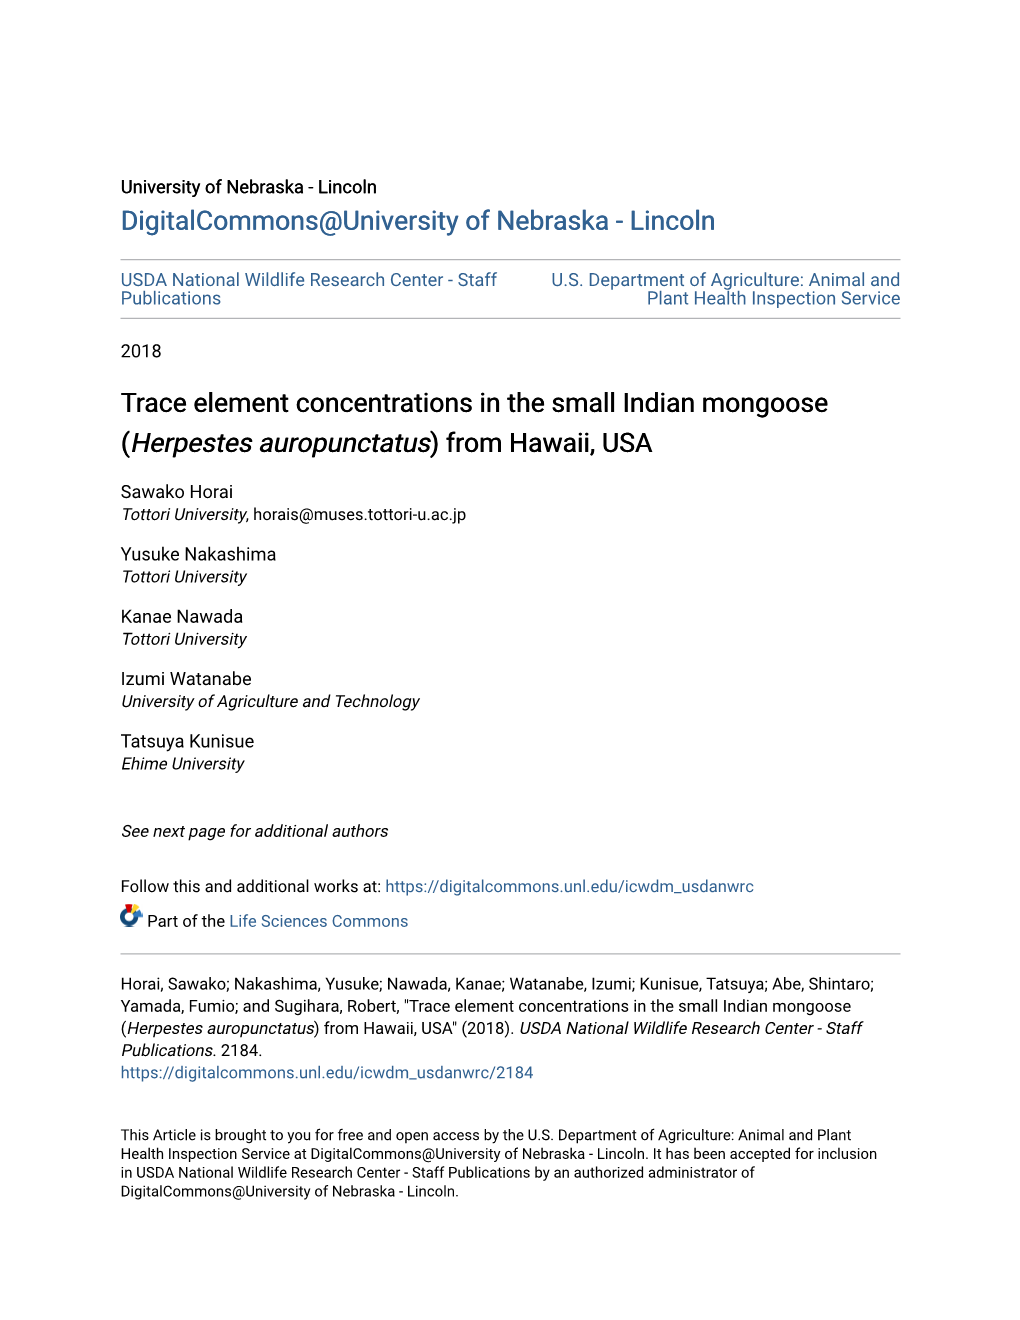 Trace Element Concentrations in the Small Indian Mongoose (&lt;I